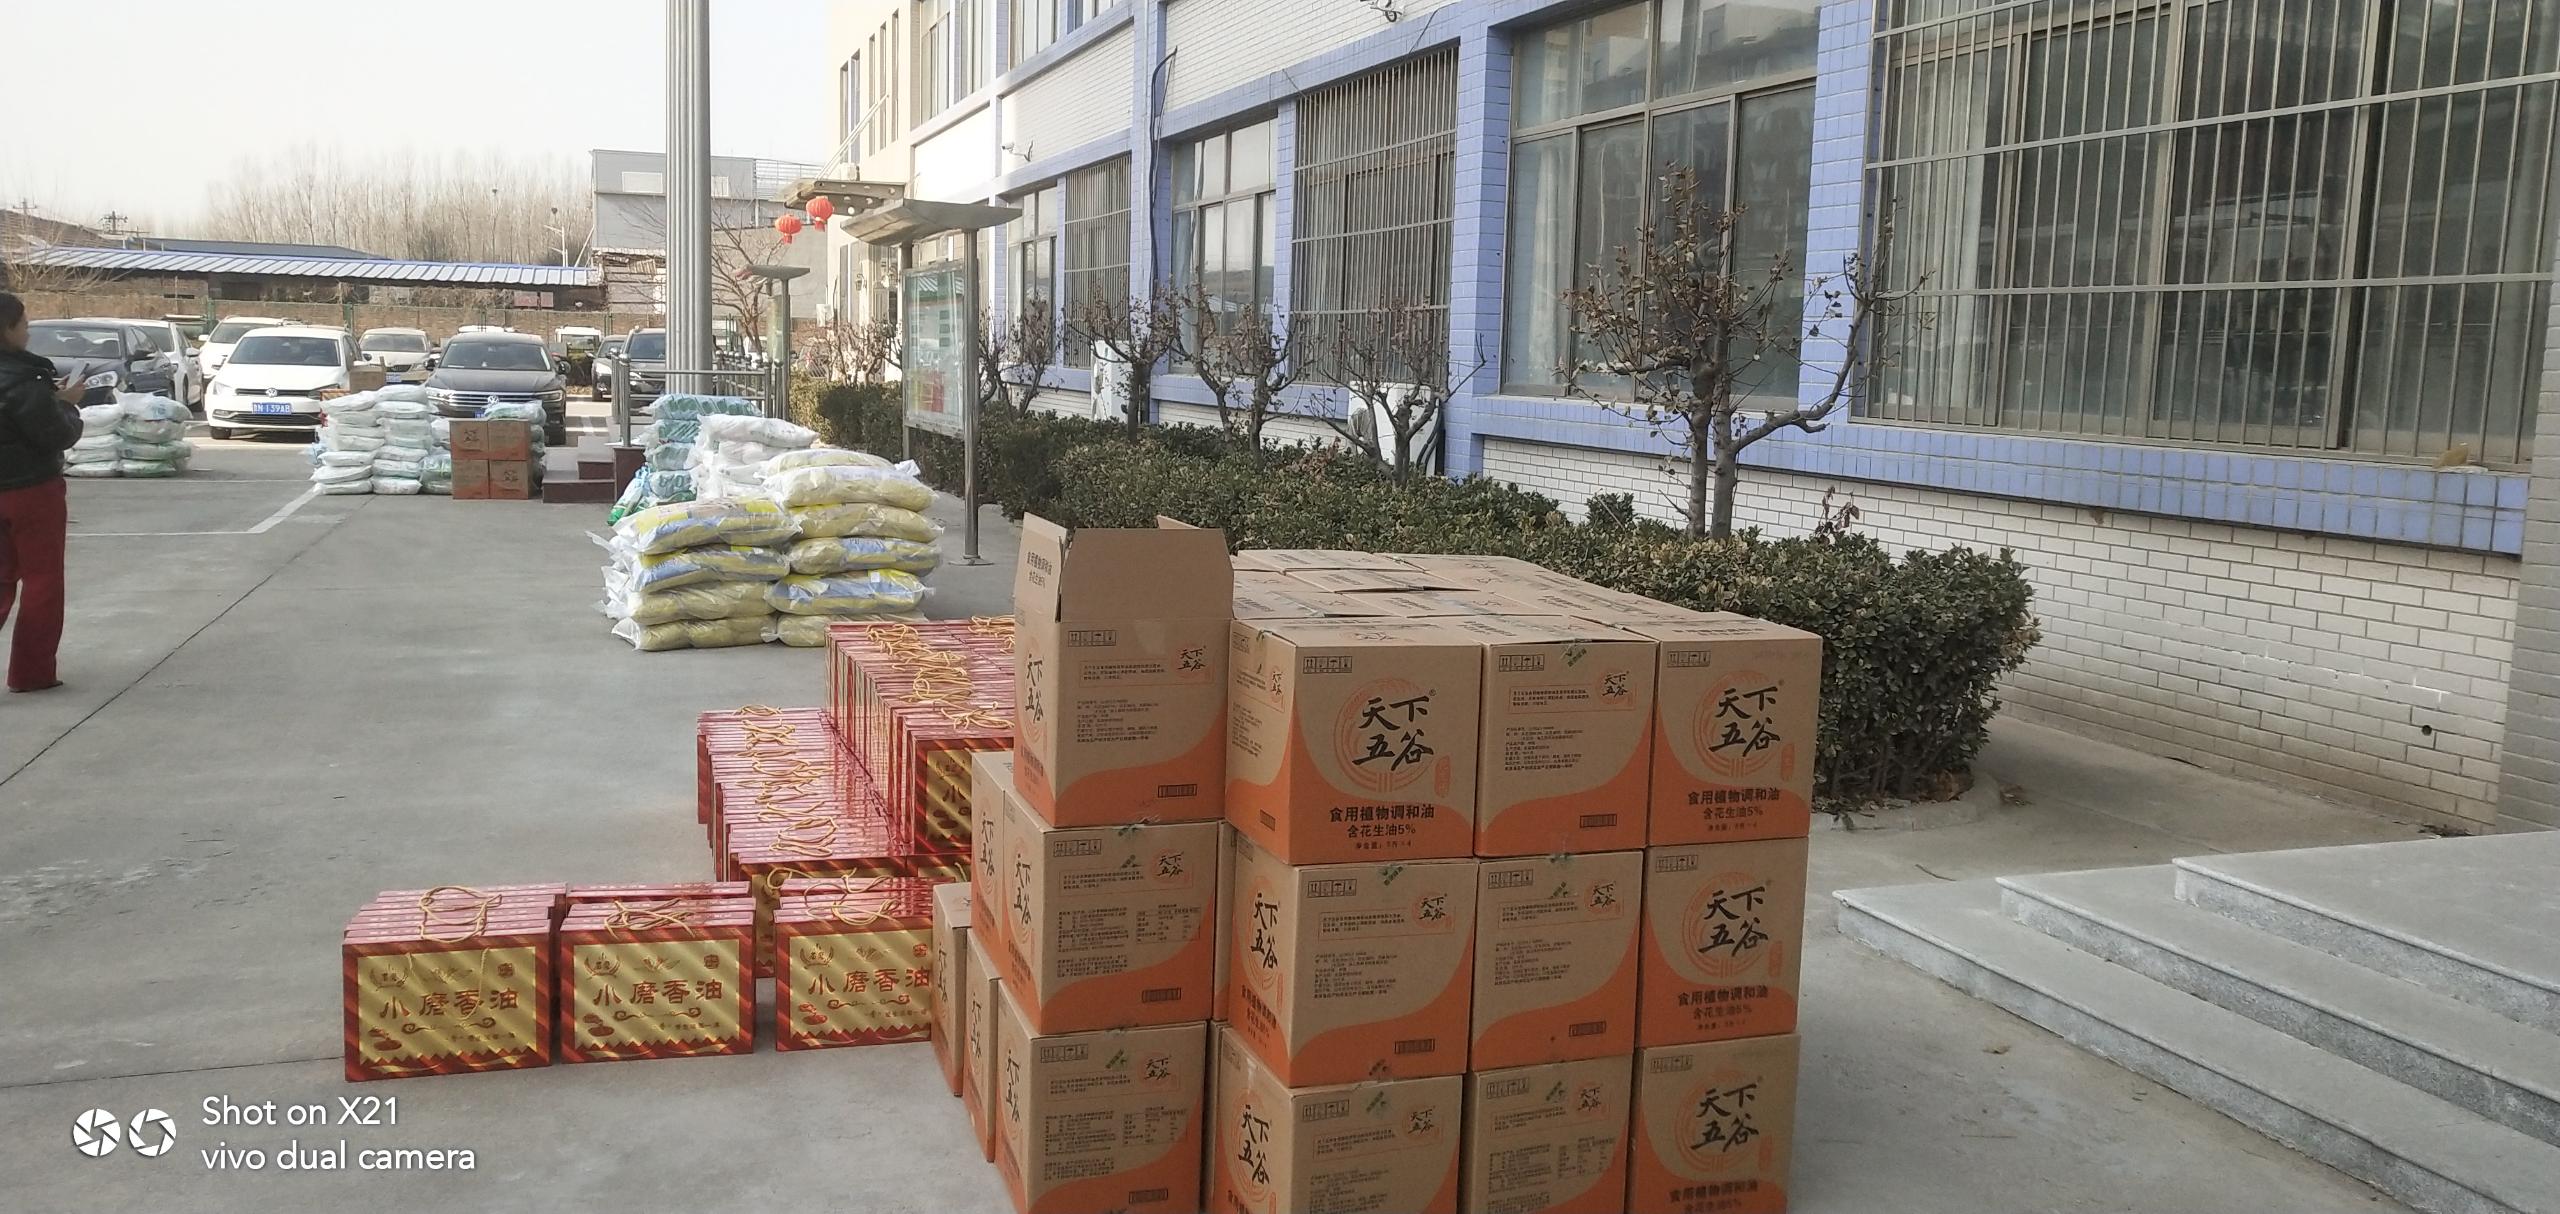 Company sends New Year’s goods to celebrate the New Year